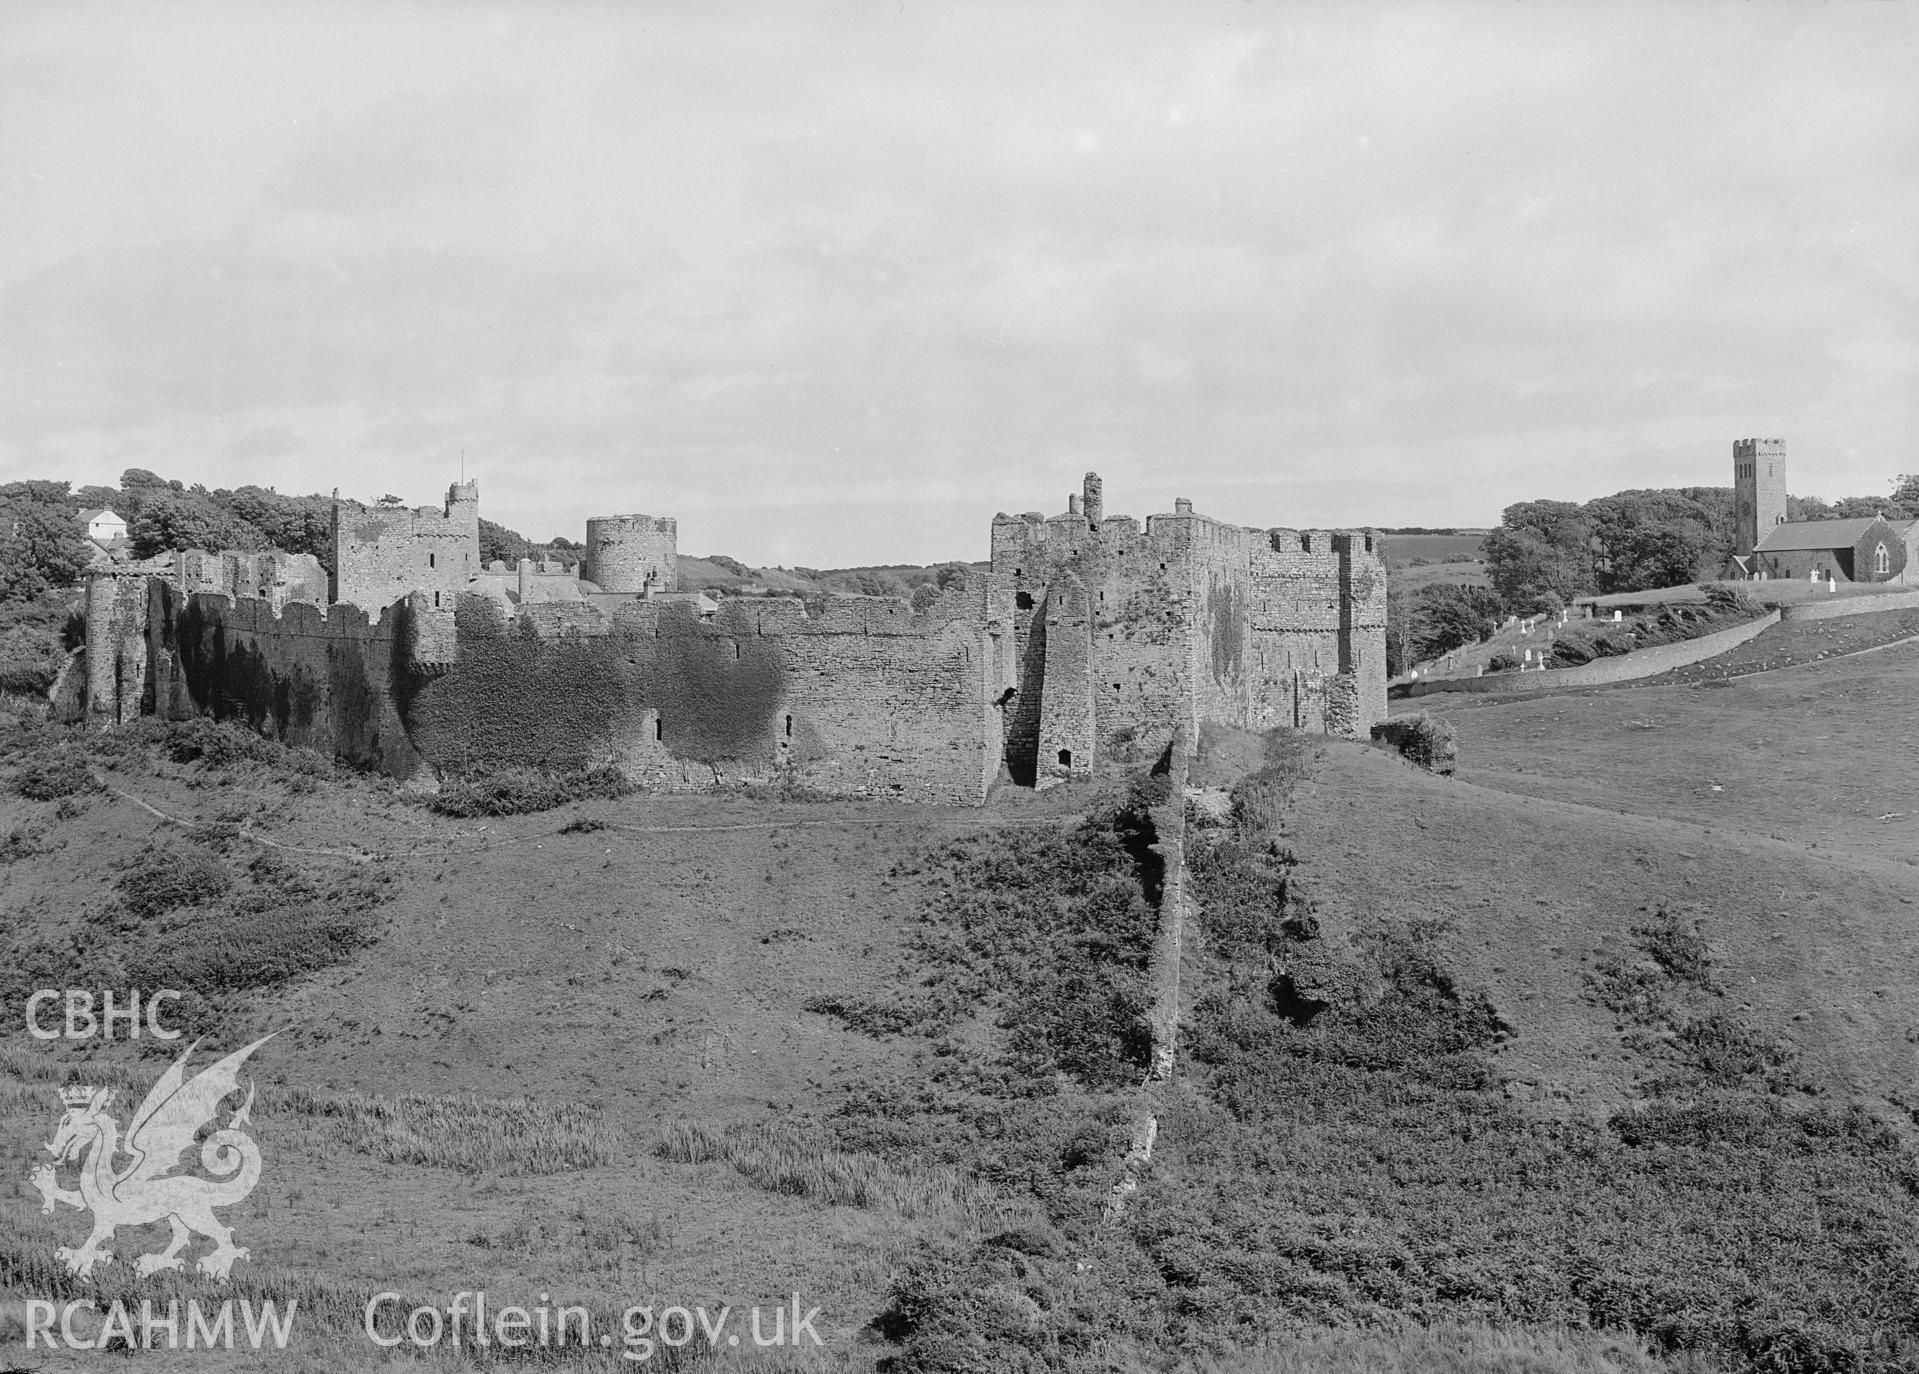 View of Manorbier Castle from the southwest.